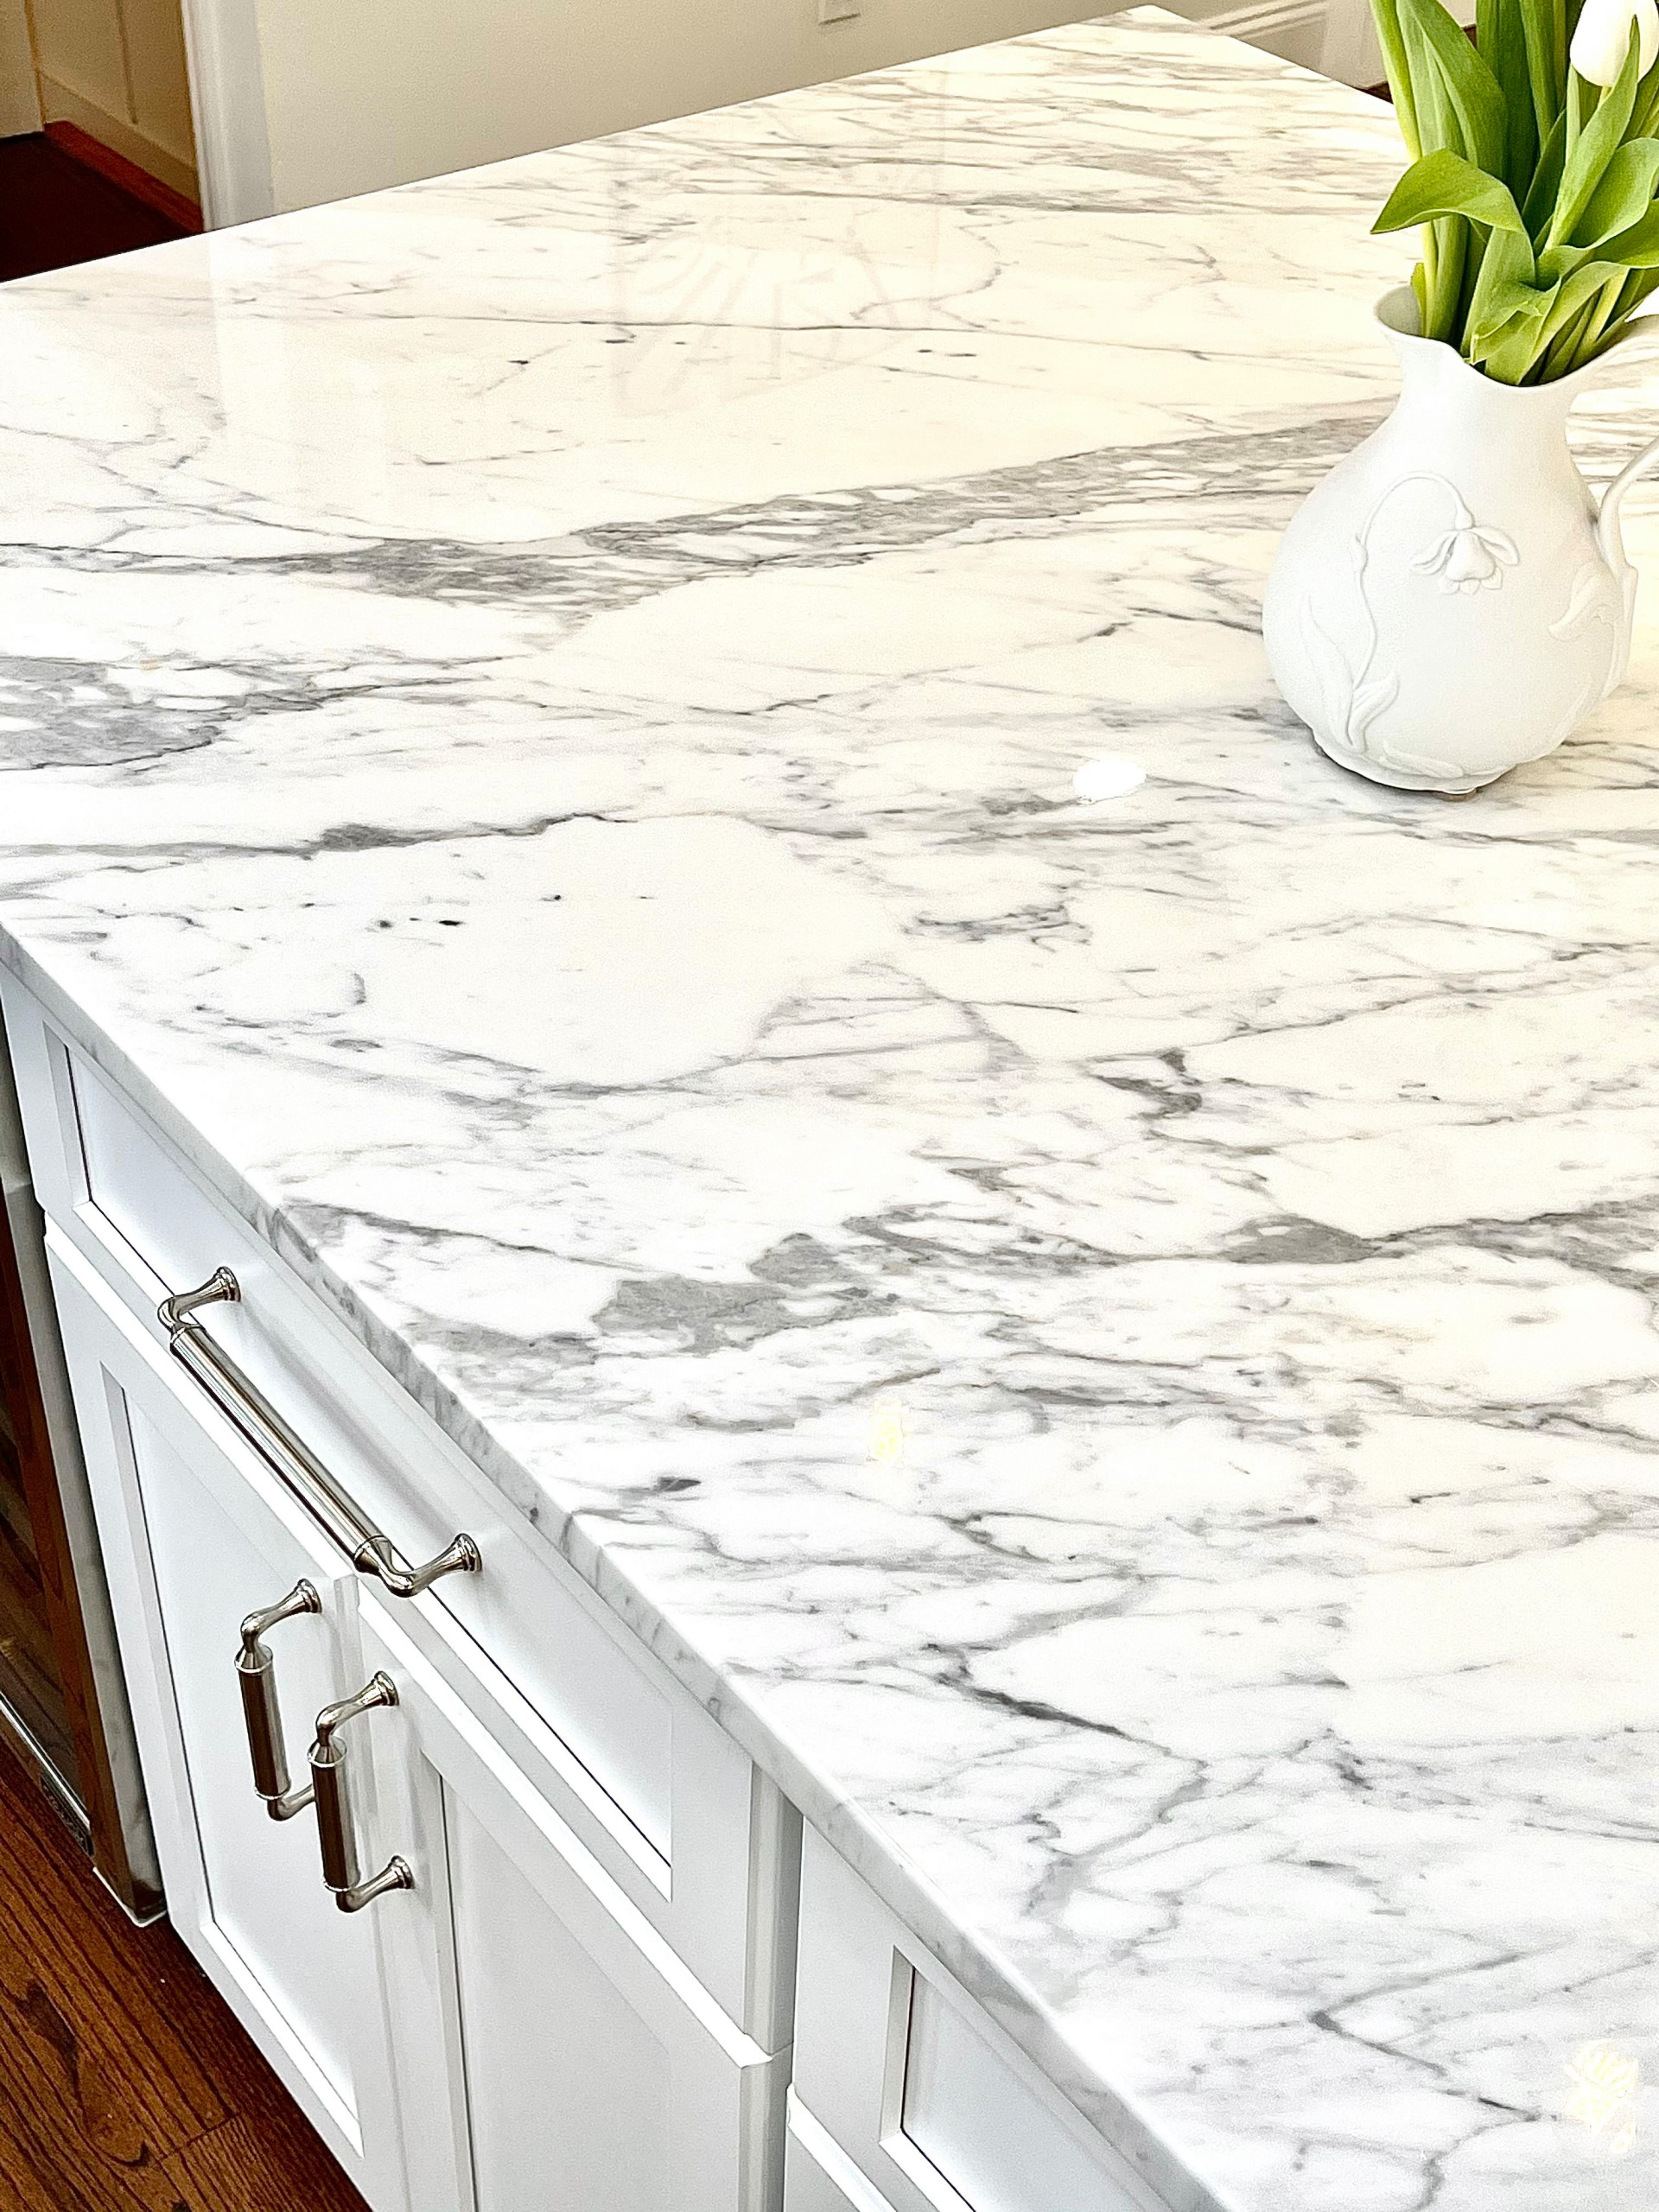 The (literal) centerpiece that gives this space its haute aesthetic is the splurge purchase of a Calcutta Gold Marble slab for the center island countertop.